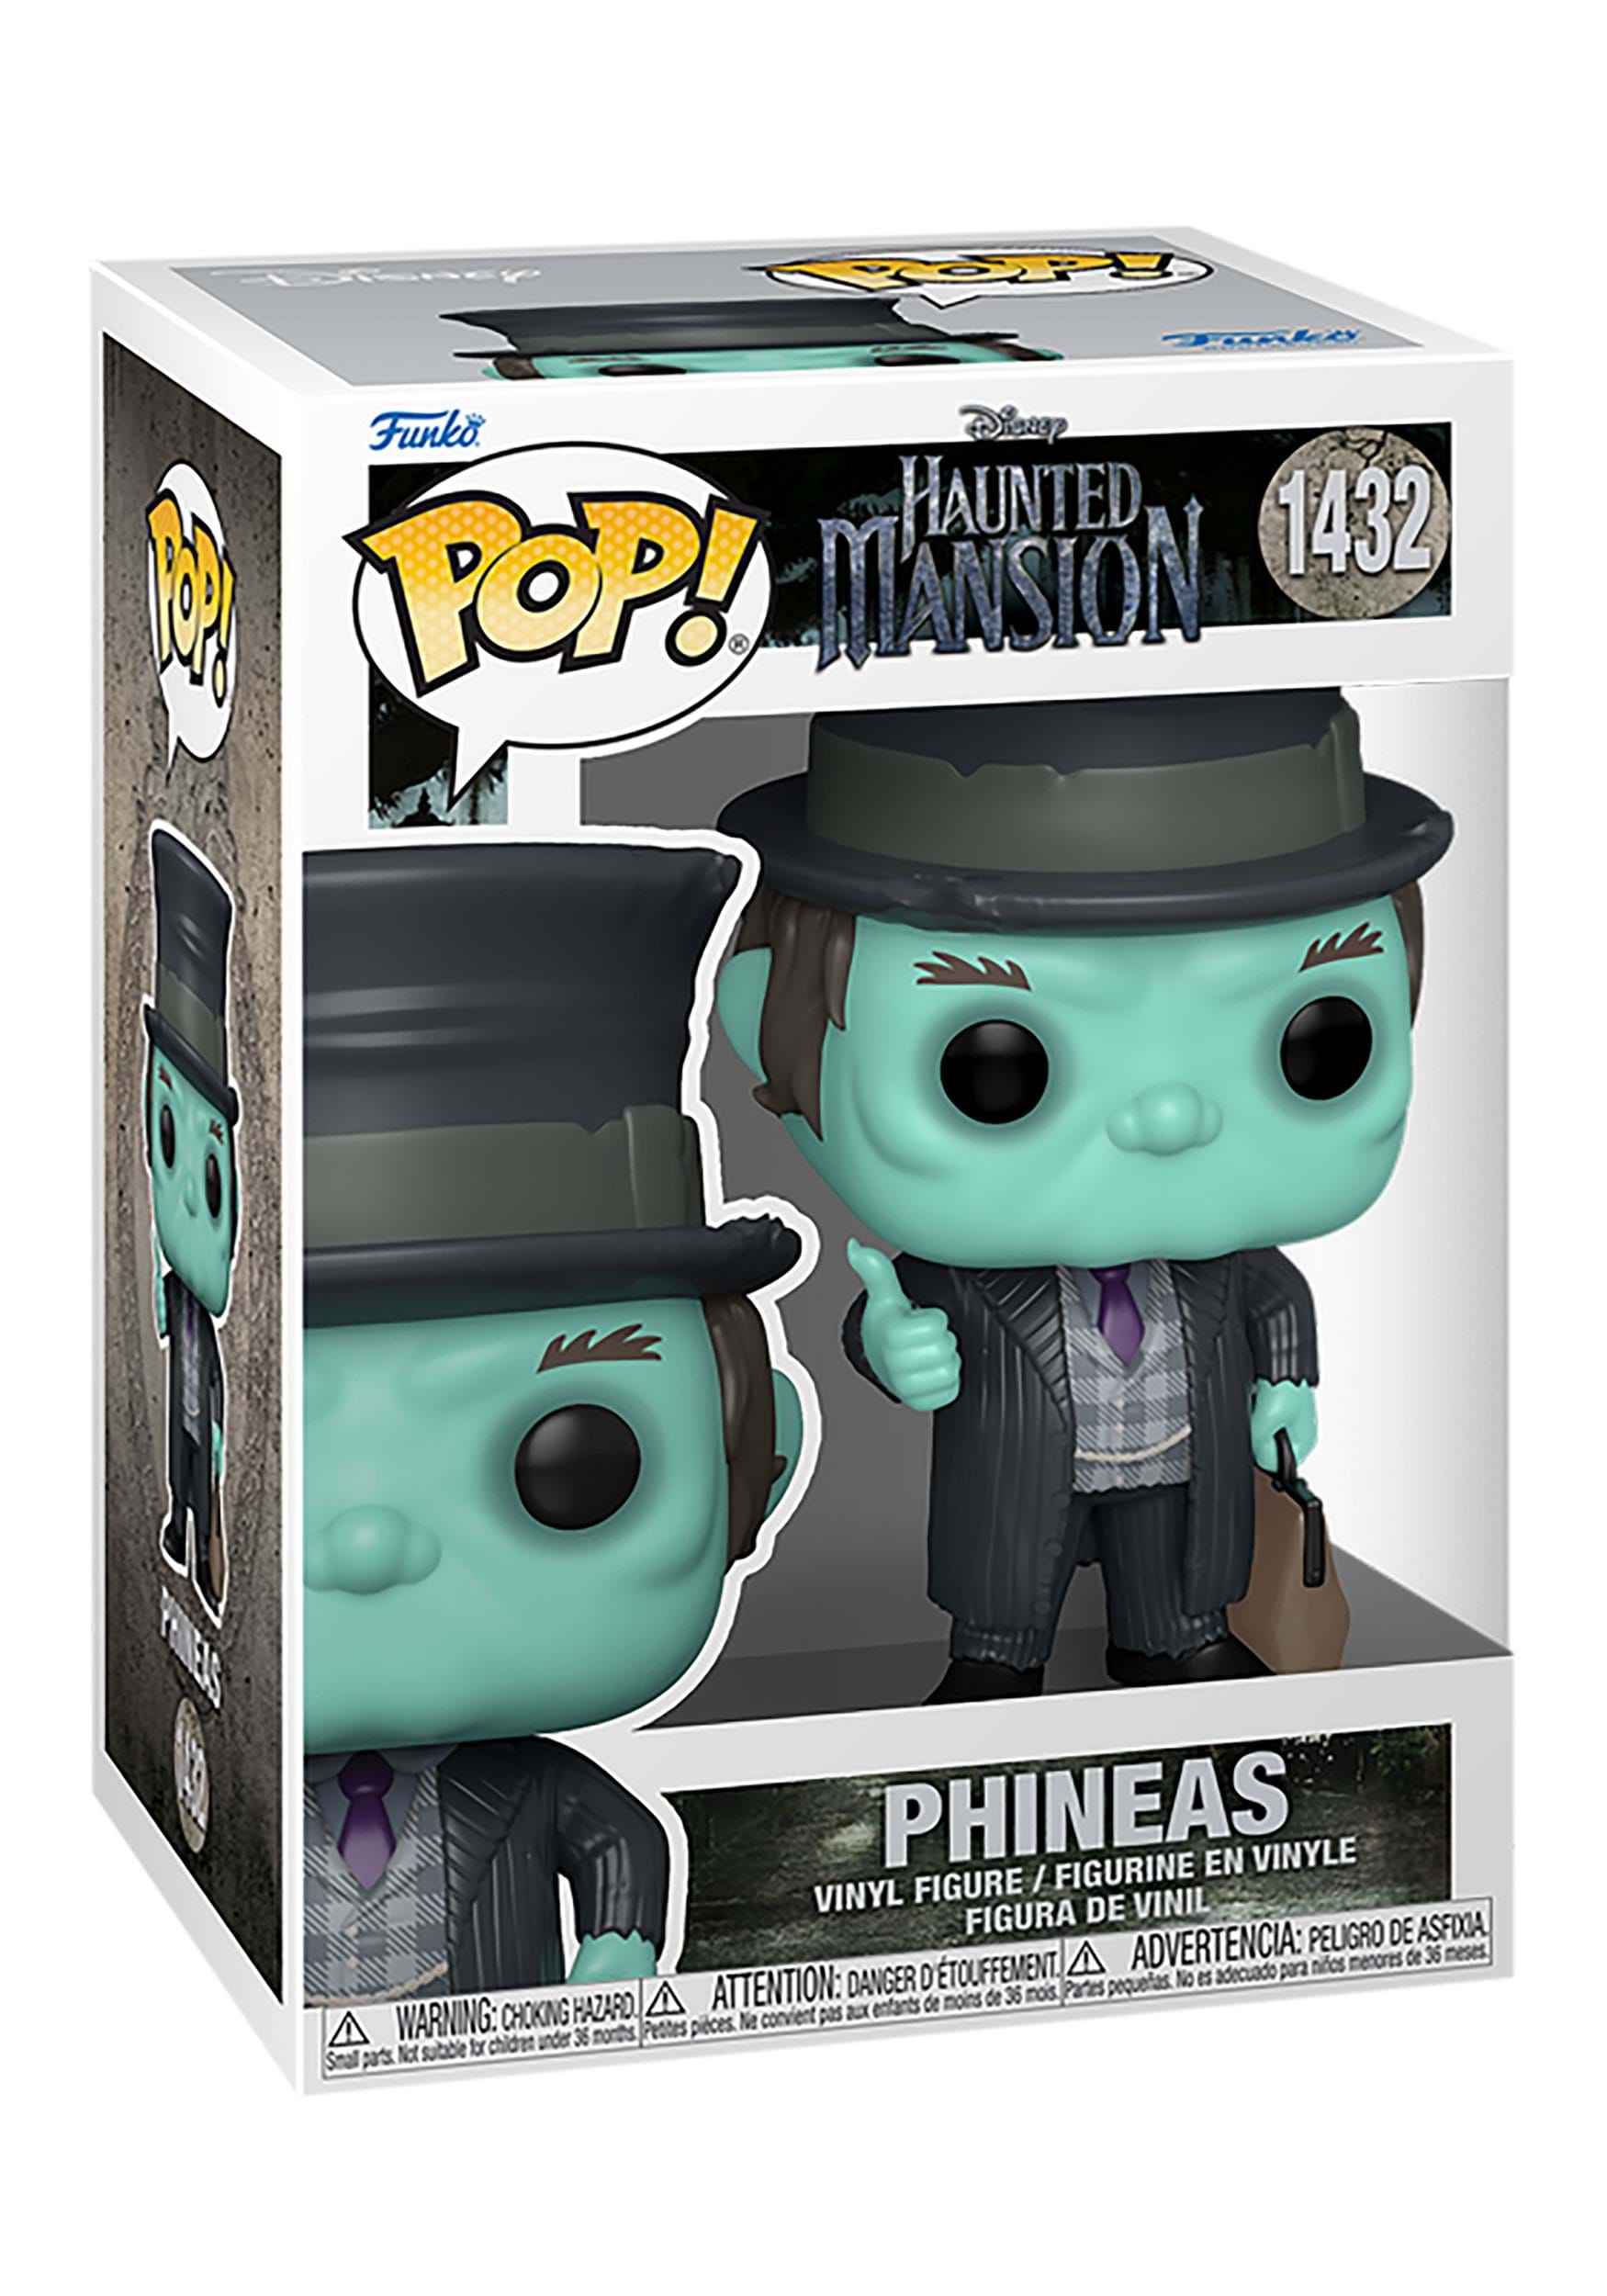 Funko Pop! Special Make-A-Wish Edition: Sulley (Metallic) – Magical Pins &  Collectibles